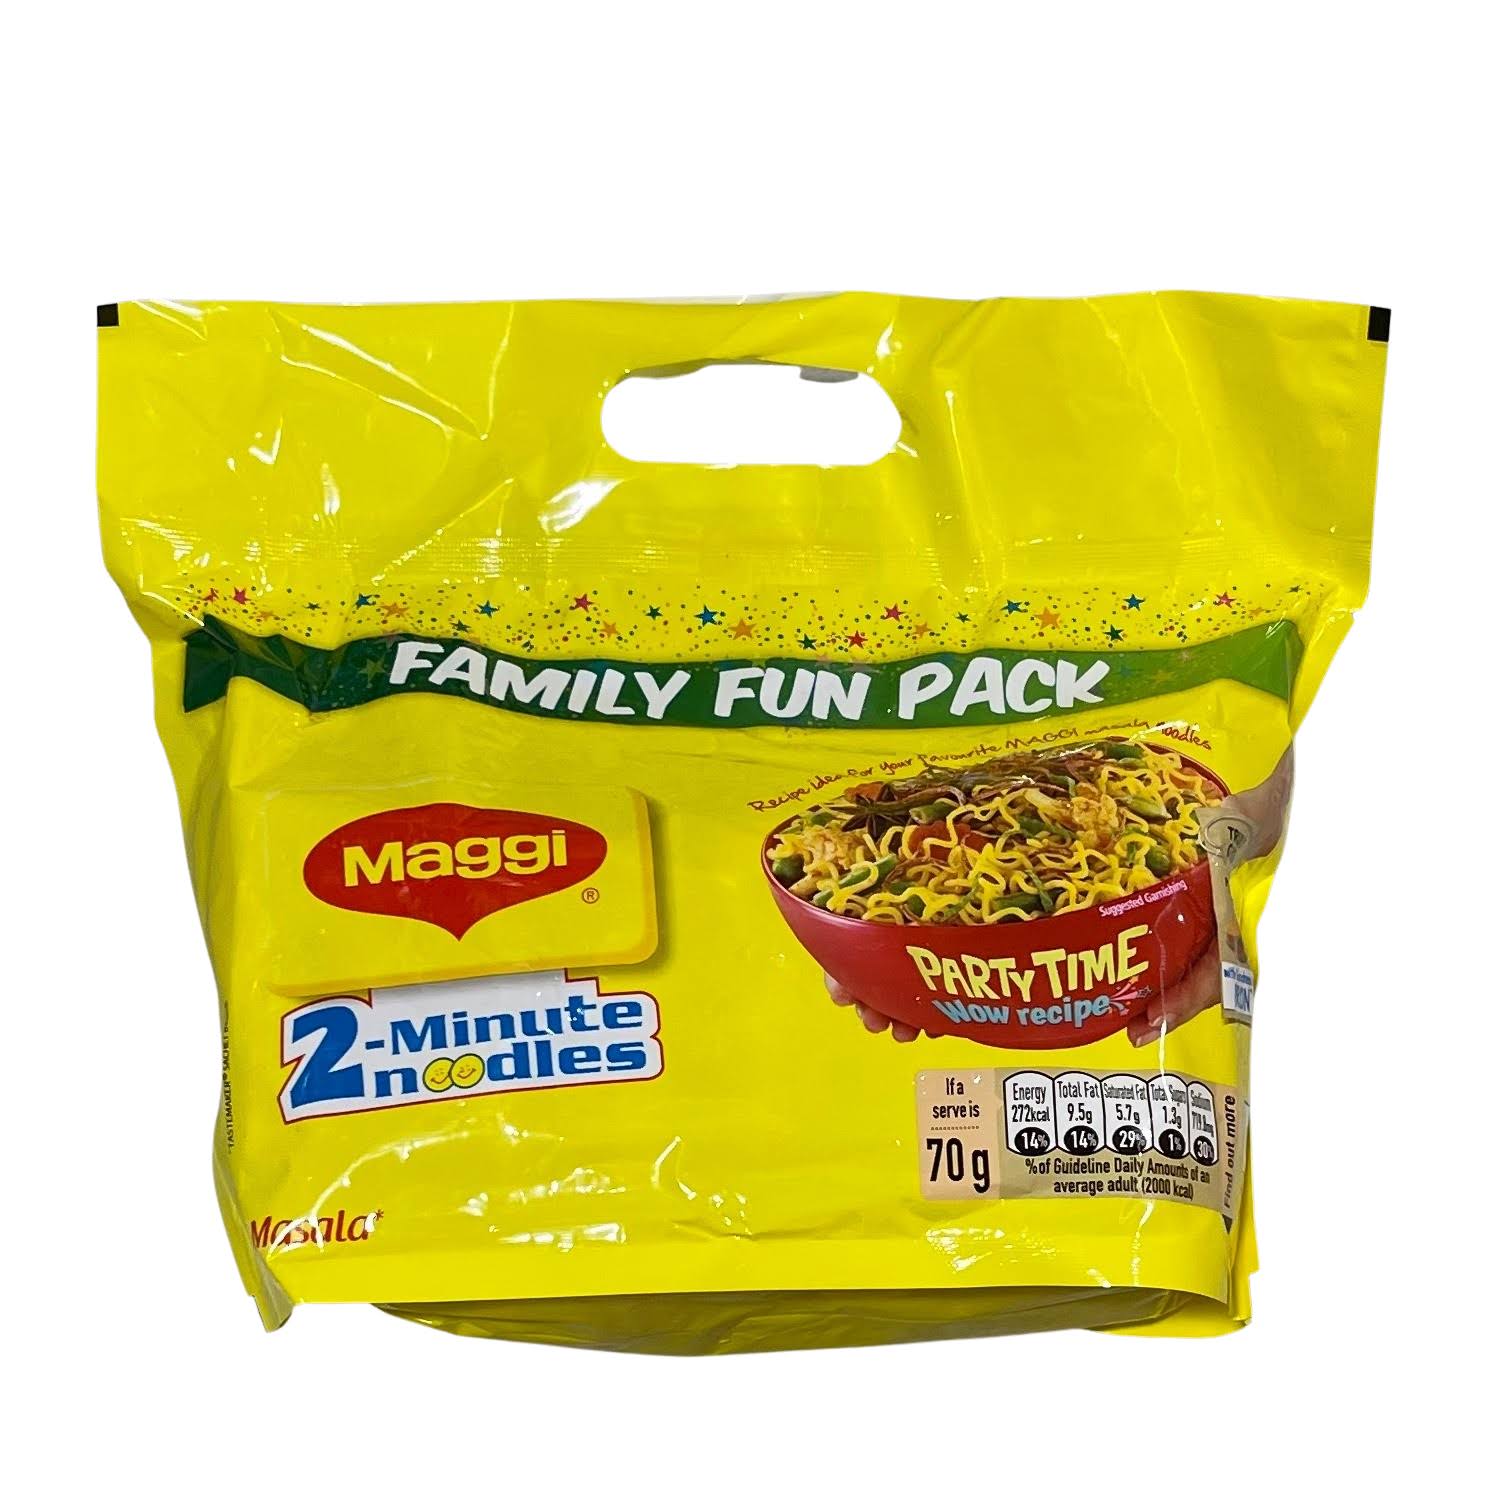 Maggi 2-Minute Noodles Family Pack, 8 PC